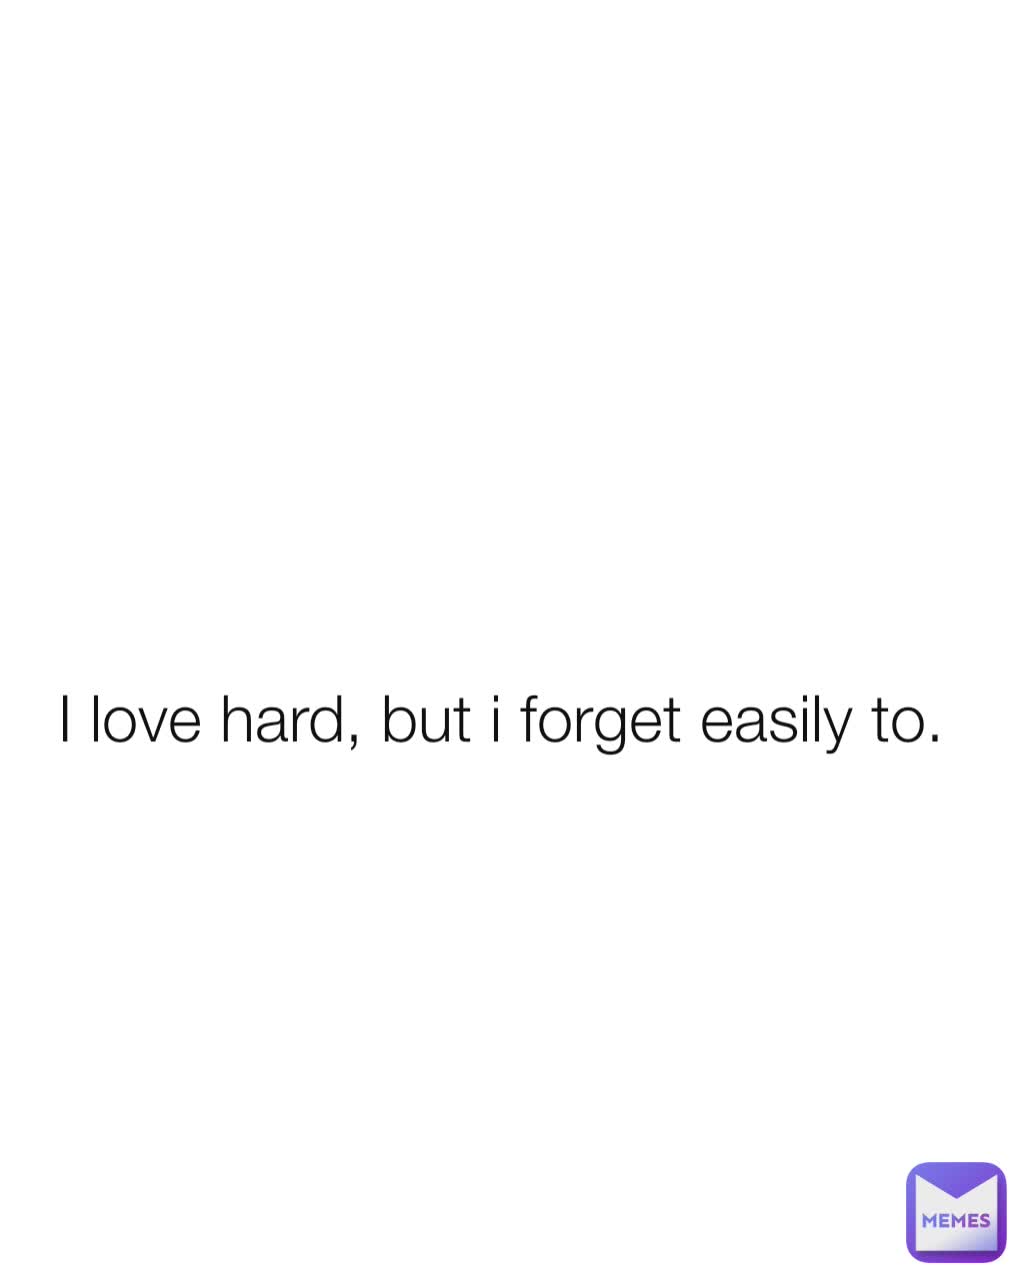 I love hard, but i forget easily to.